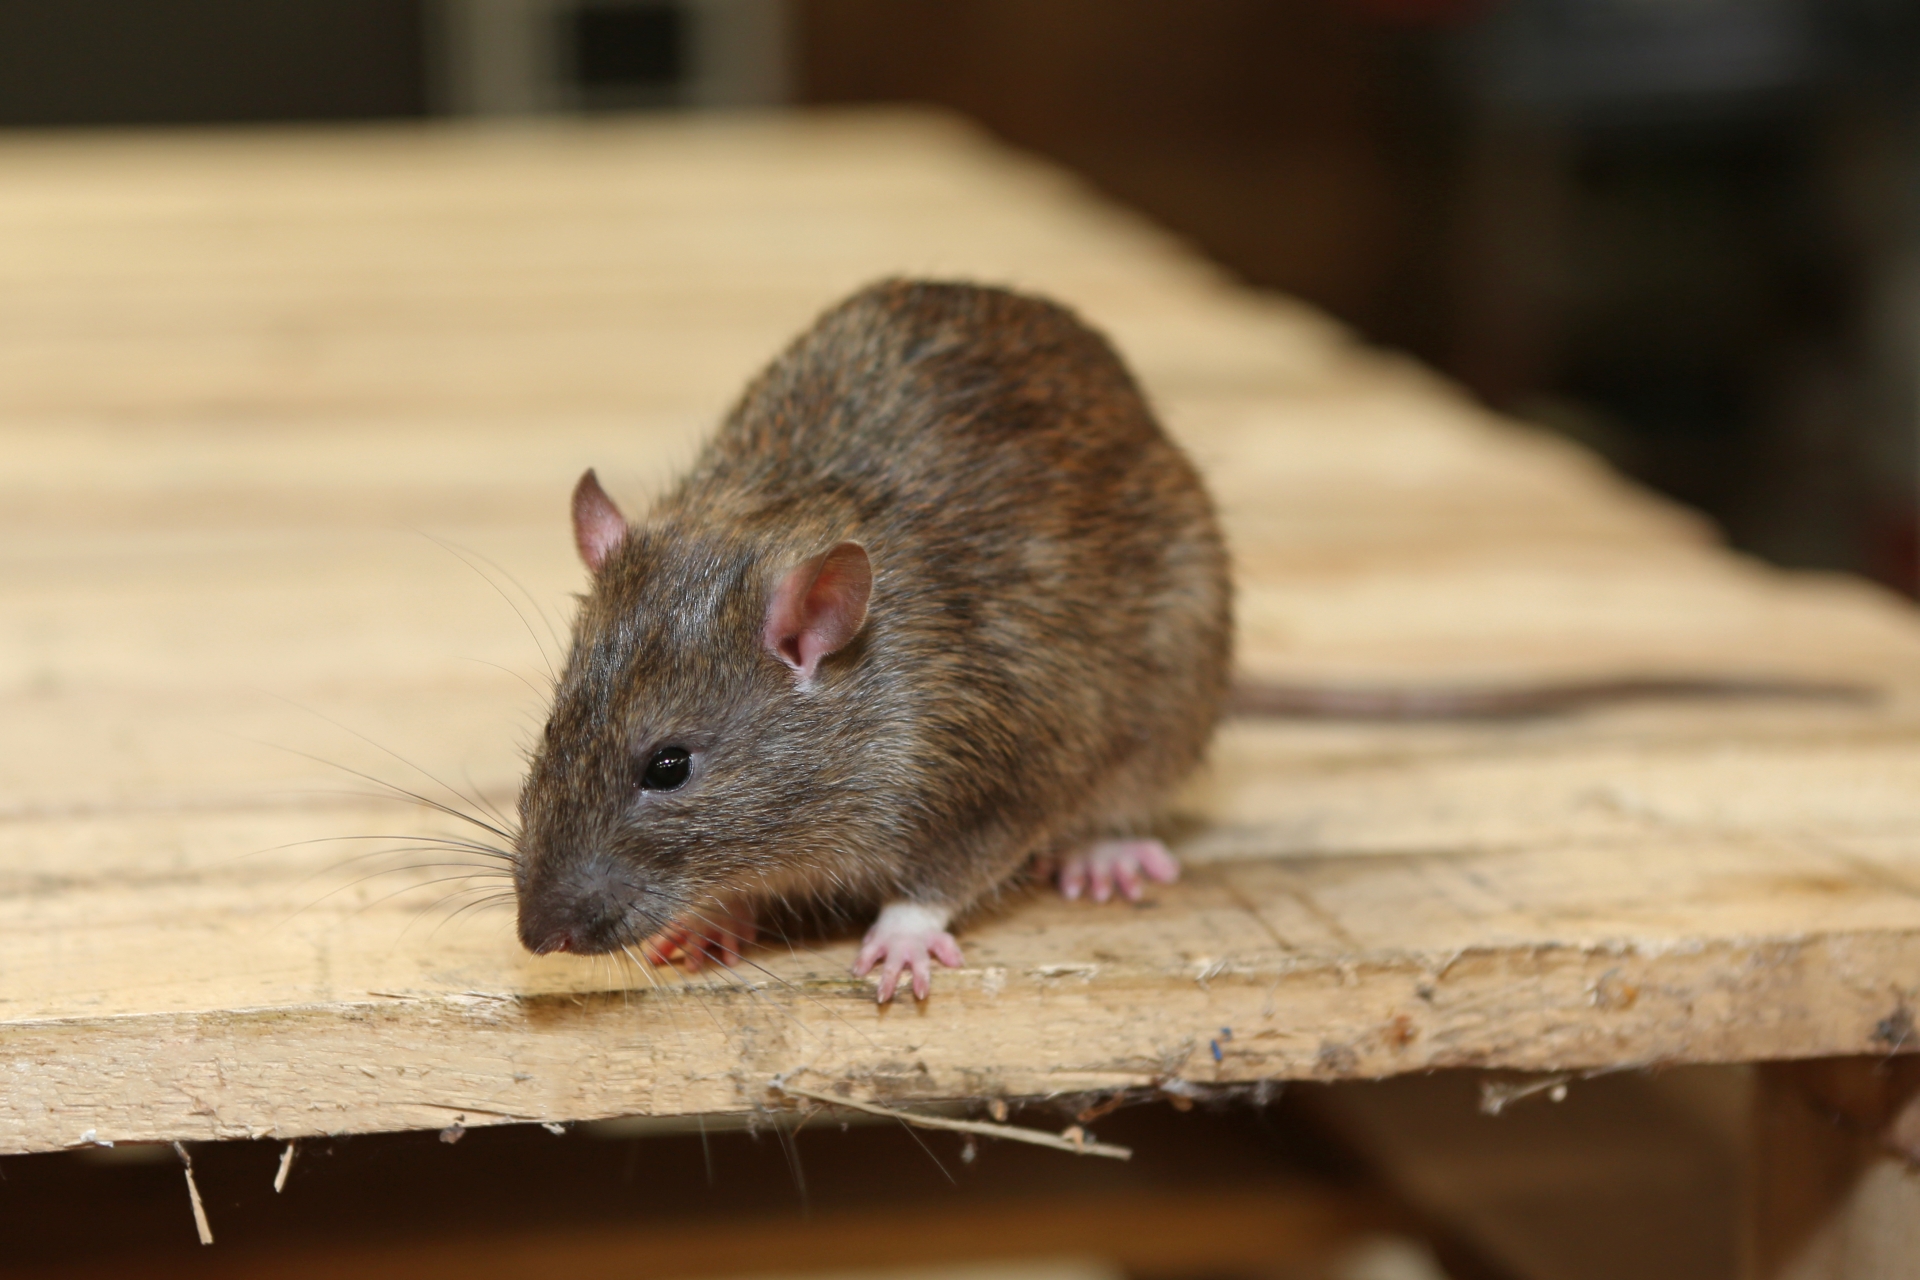 Rat Control, Pest Control in Woolwich, SE18. Call Now 020 8166 9746